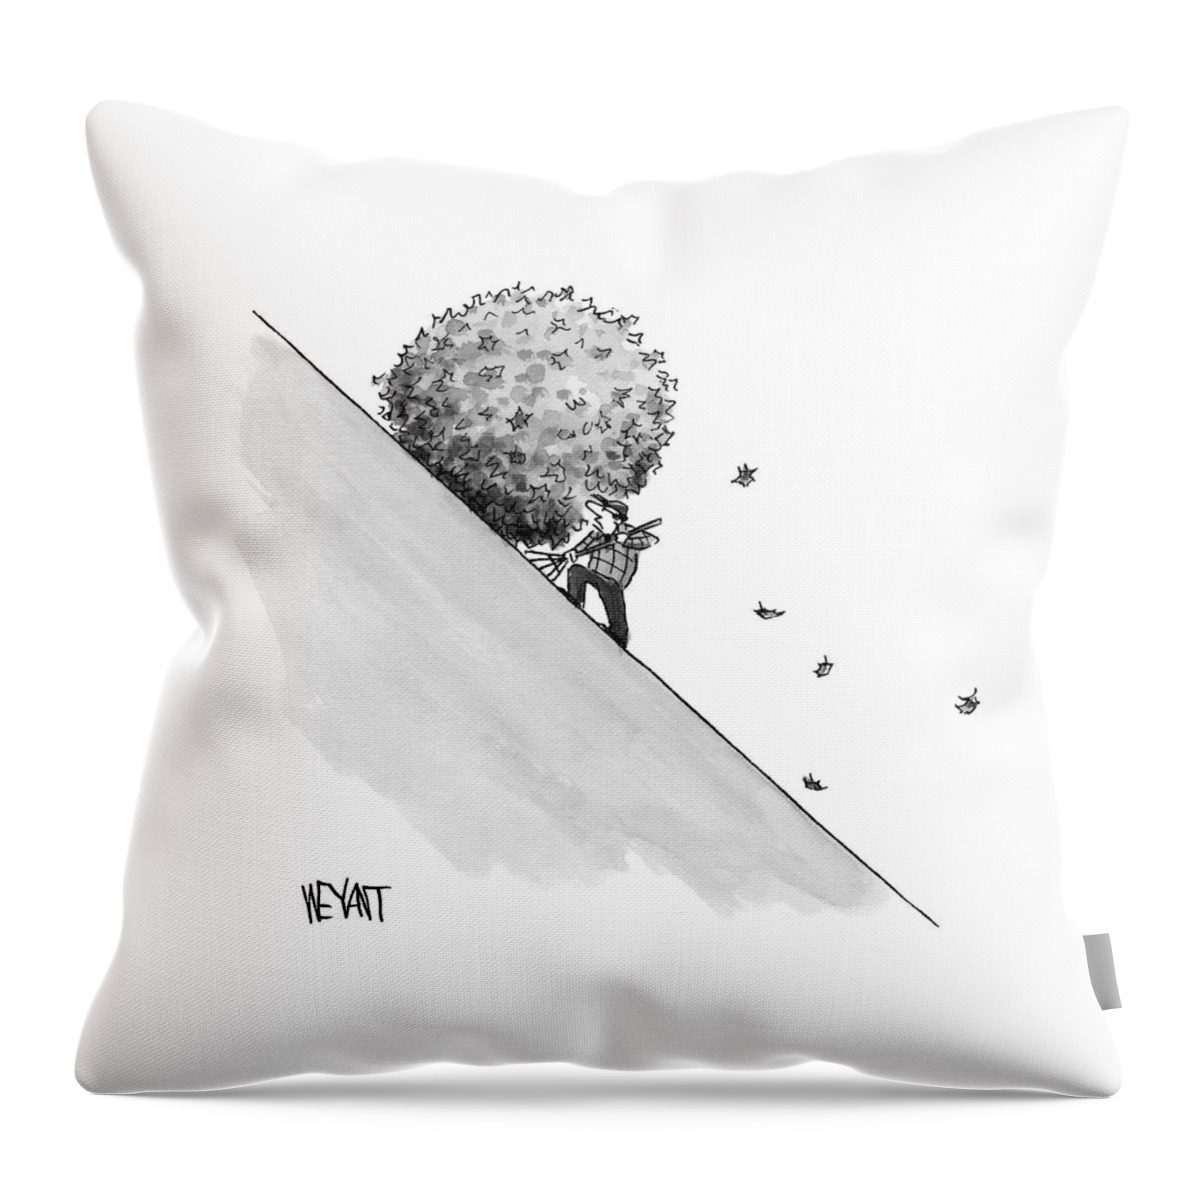 A Man Rakes Leaves Uphill Throw Pillow